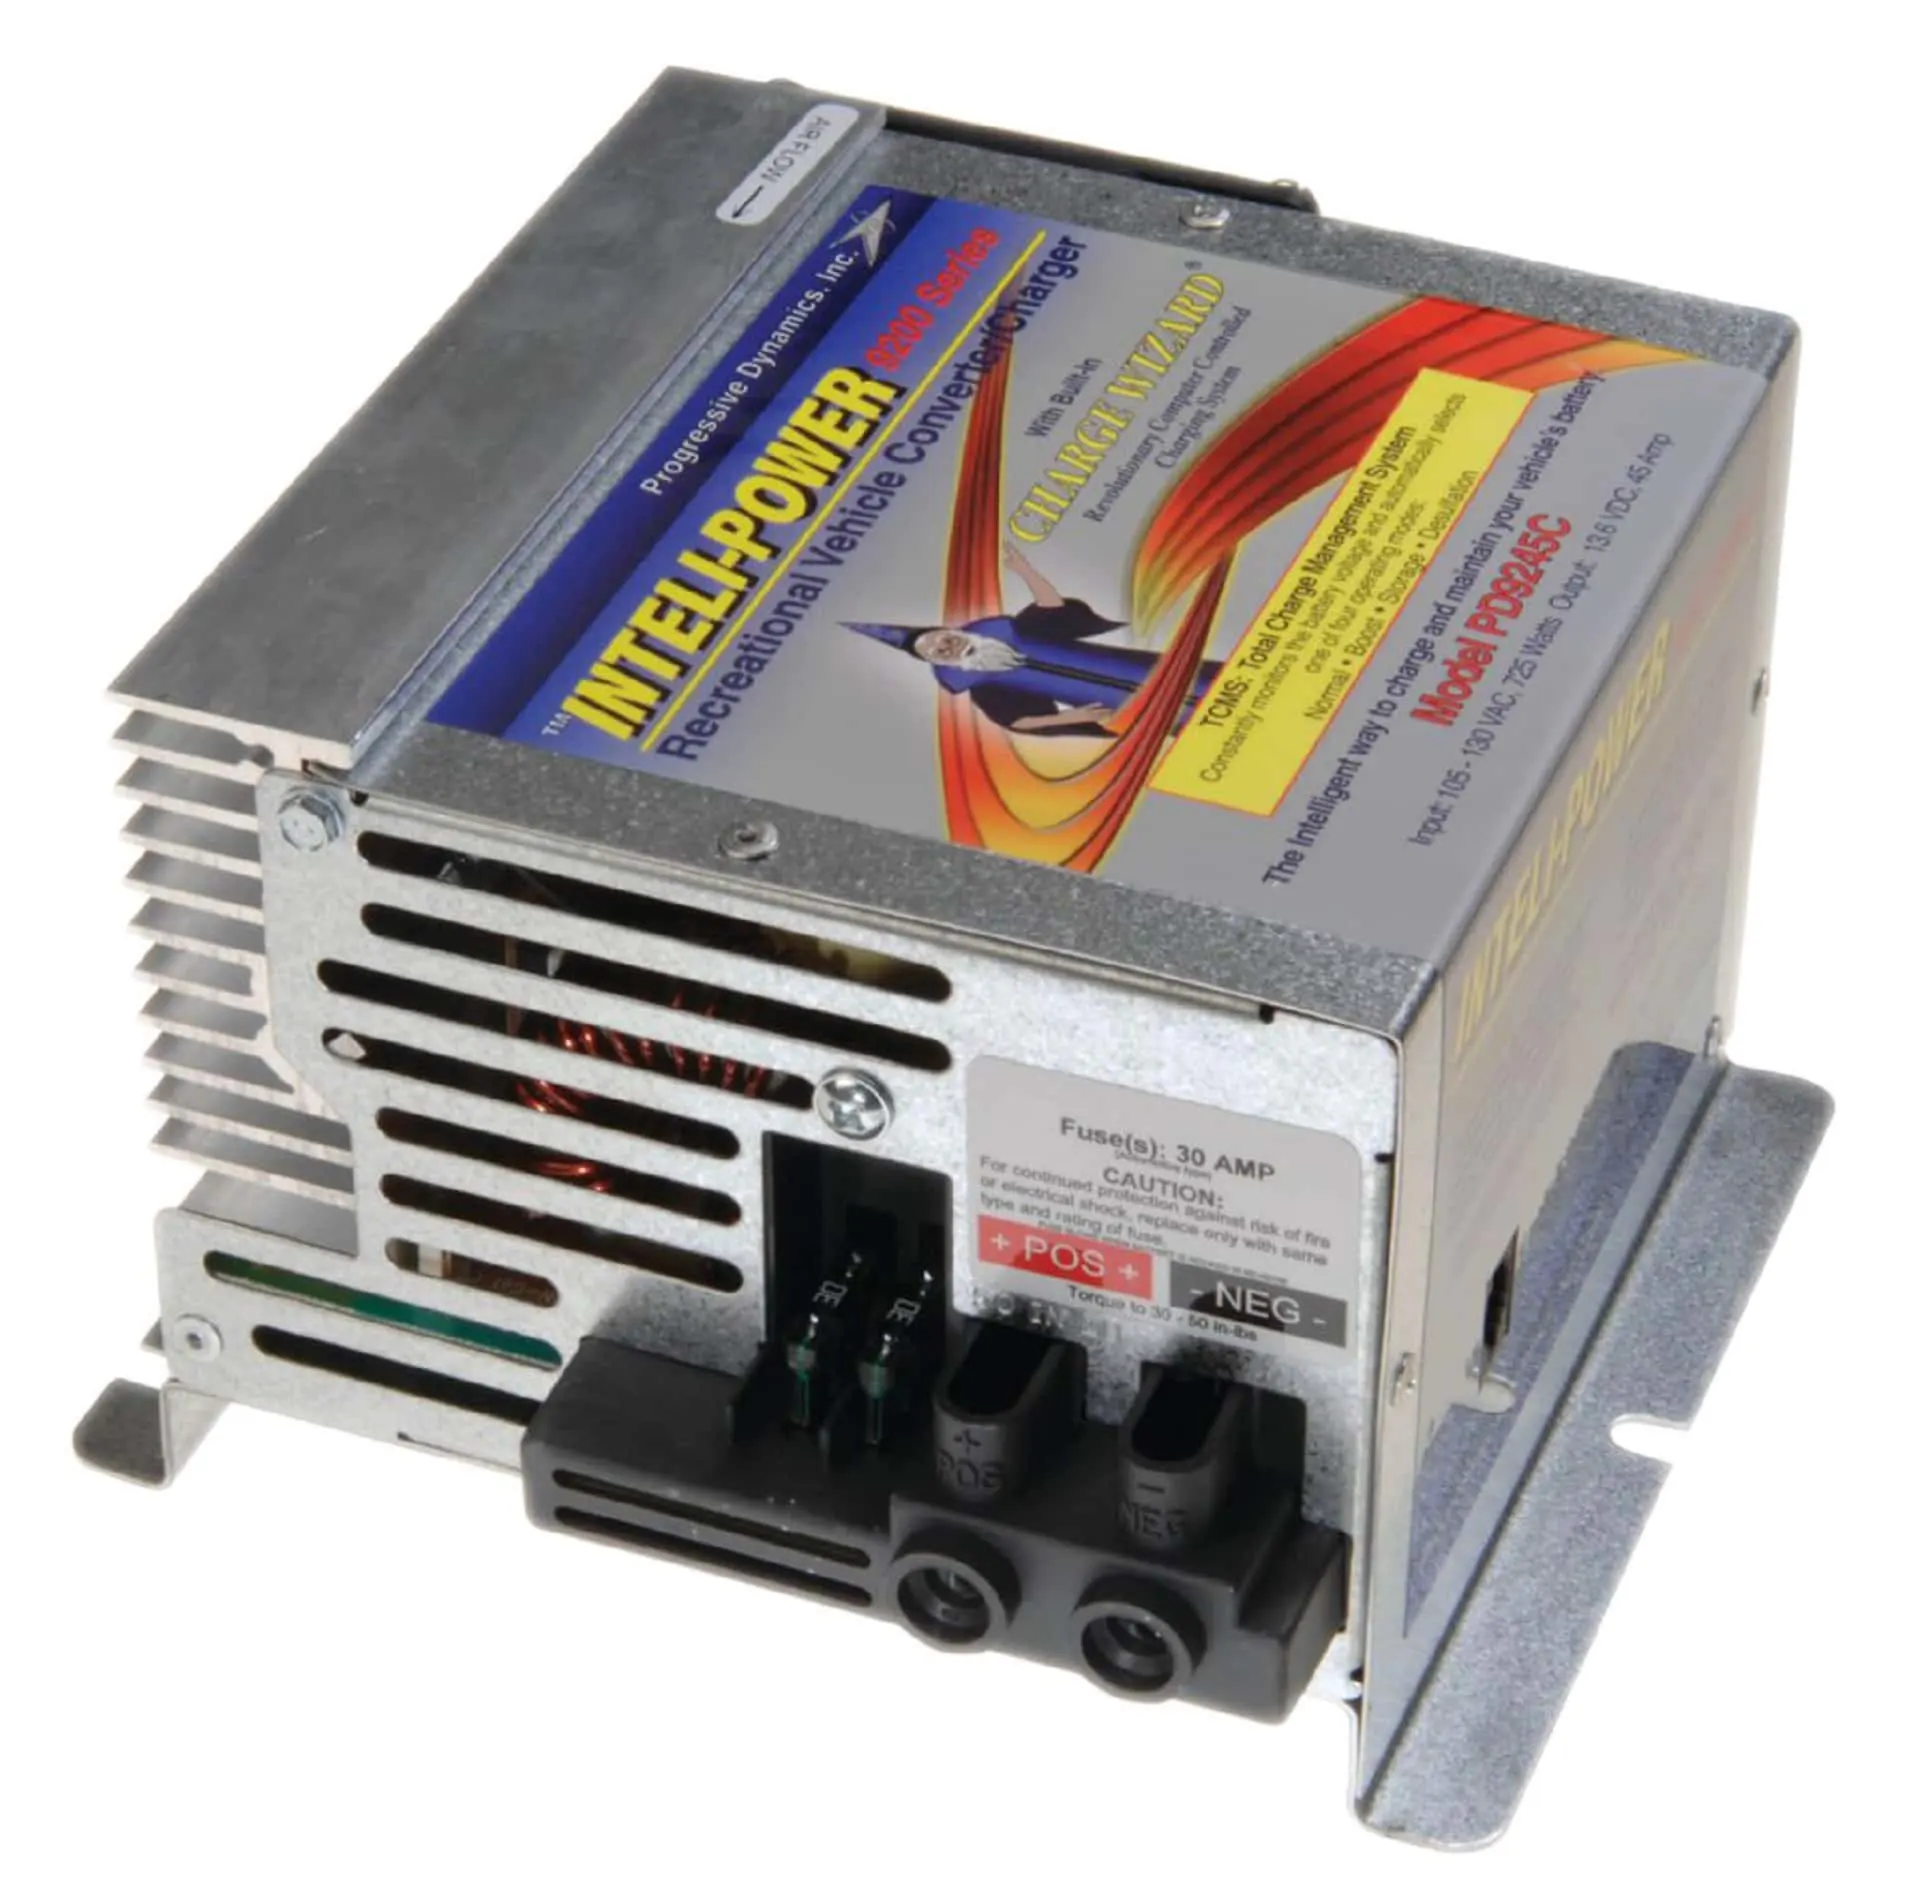 A modern 3-stage RV power converter/charger